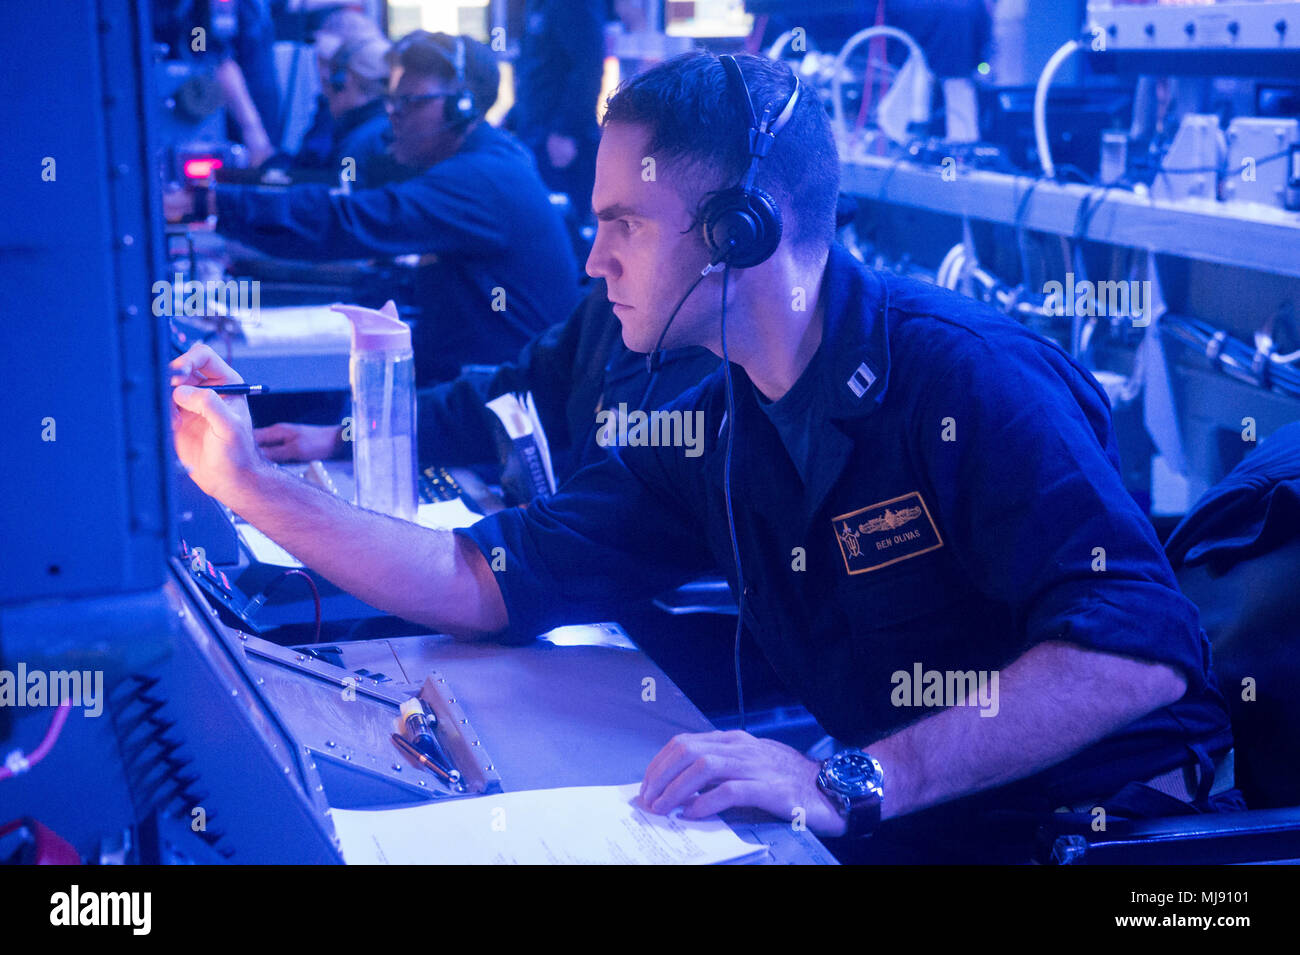 Pacific Ocean (April 20, 2018) Lieutenant Ben Olivas, a Warfare Tactics Instructor (WTI), from Naval Surface and Mine Warfighting Development Center (SMWDC) prepares for an Air Defense exercise during an underway Cruiser-Destroyer (CRUDES) Surface Warfare Advanced Tactical Training (SWATT) exercise aboard USS Stockdale (DDG 106).  Stockdale is one of three CRUDES warships from USS John C. Stennis (CVN 74) Carrier Strike Group (CSG) completing a CRUDES SWATT exercise.  The other ships participating in the Naval Surface and Mine Warfighting Development Center (SMWDC) led exercise are USS Mobile  Stock Photo